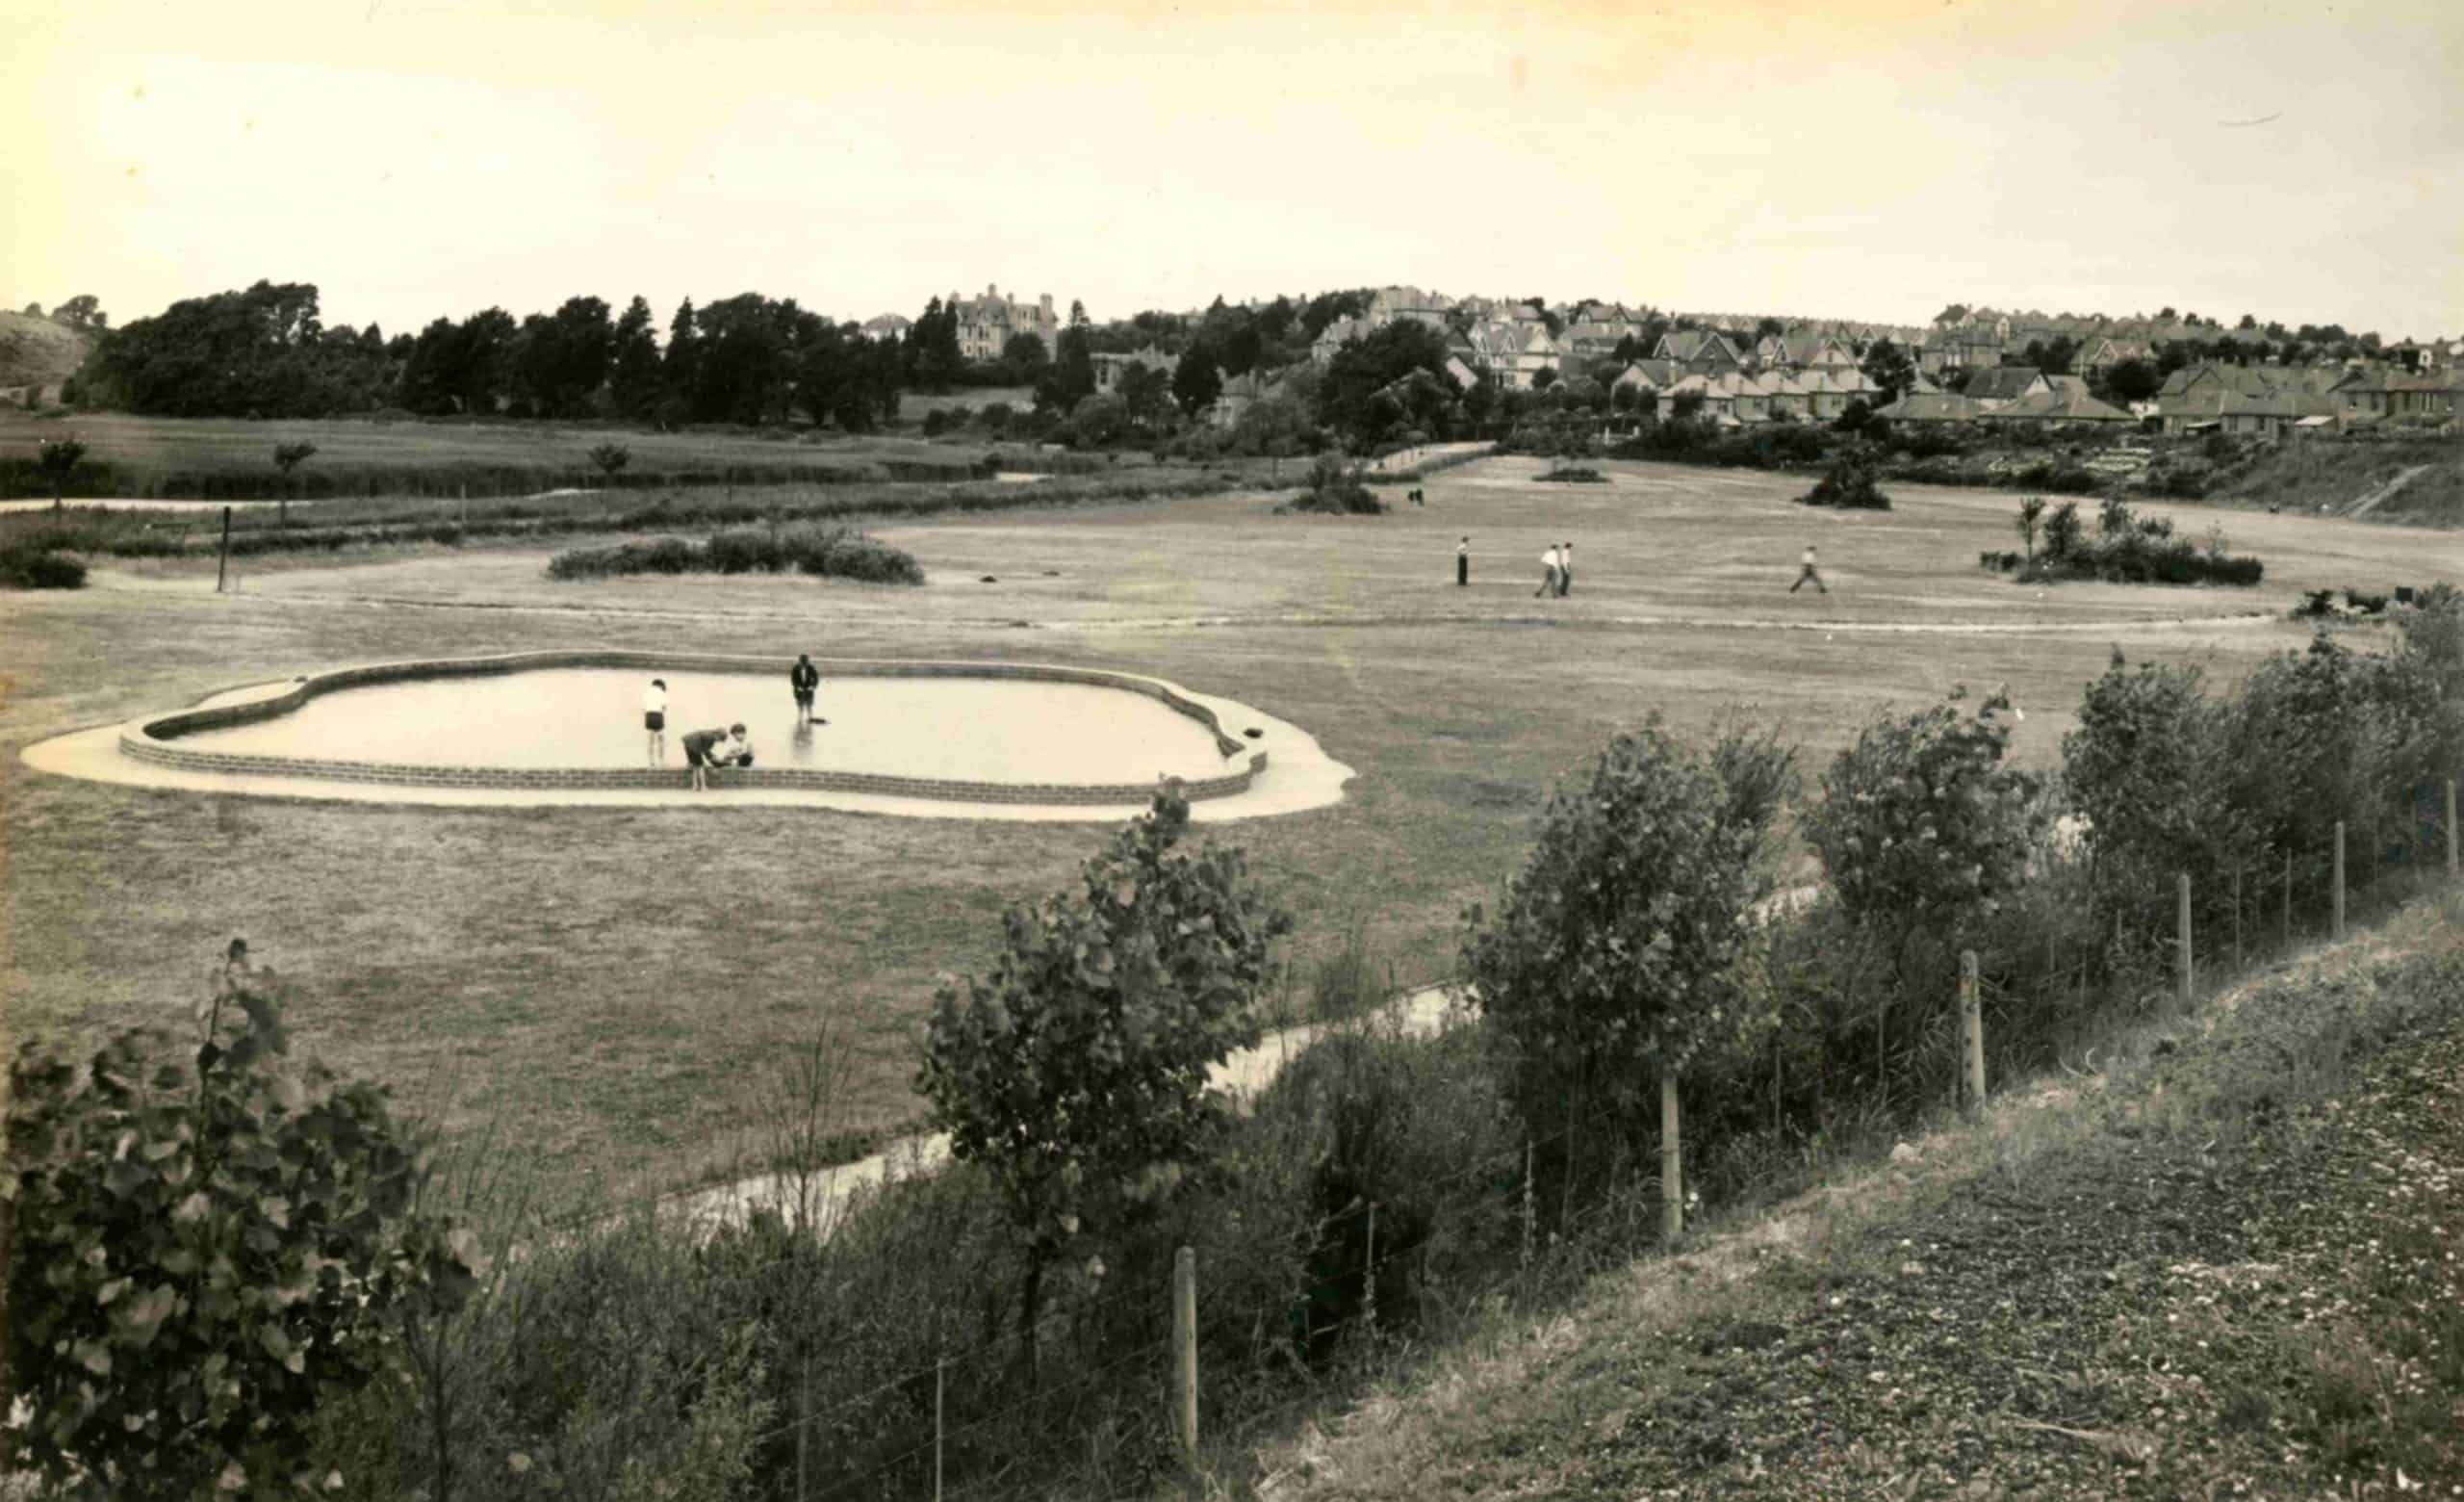 Vintage black and white photo of a park with people scattered around a pond, surrounded by open grassy areas and a distant housing development.